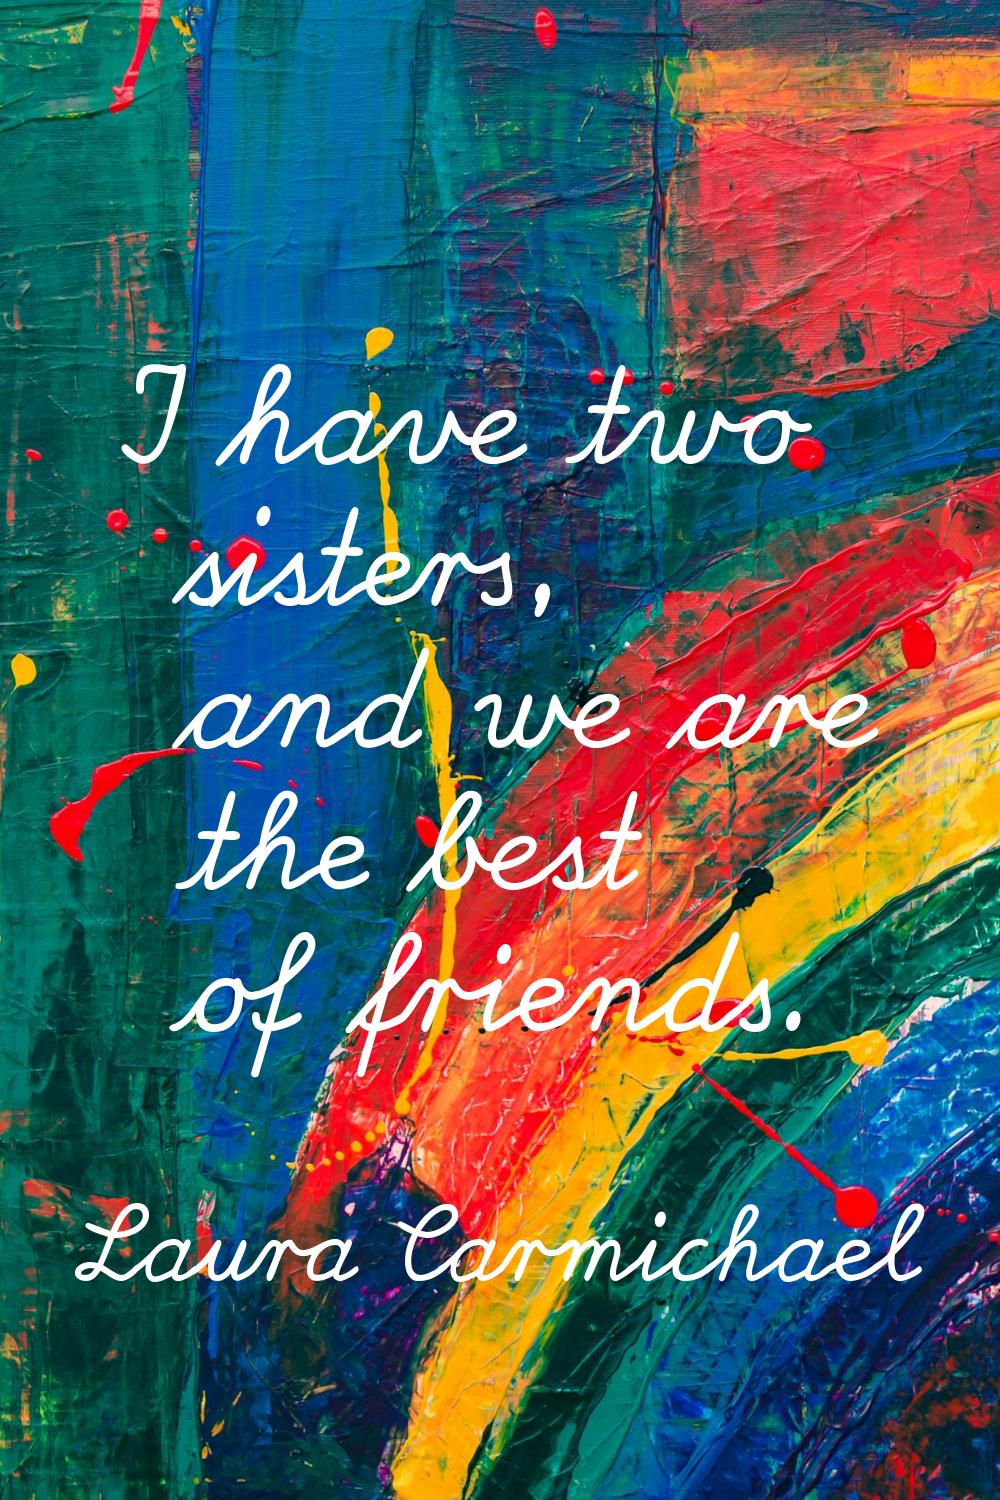 I have two sisters, and we are the best of friends.